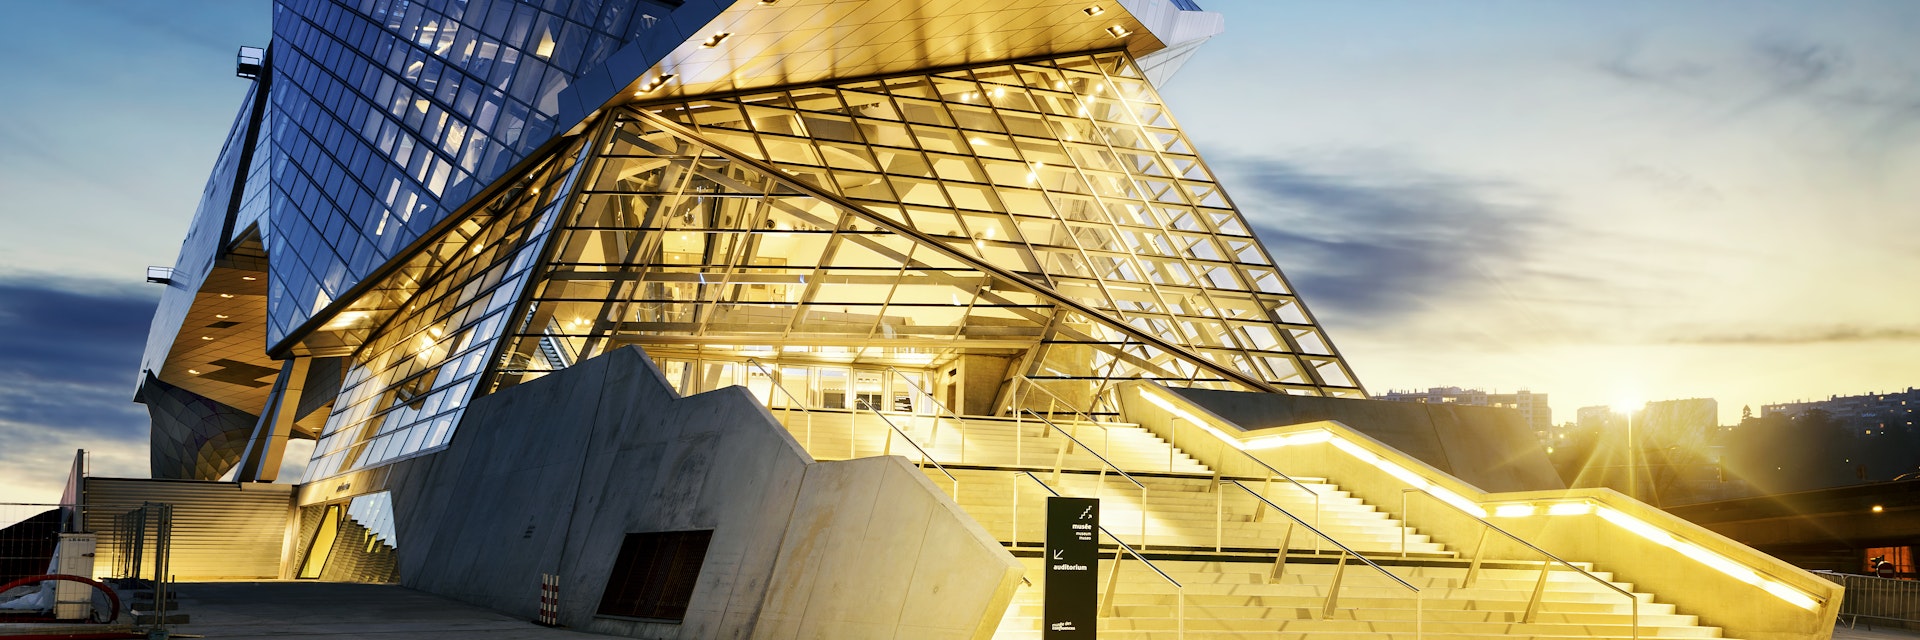 LYON, FRANCE, DECEMBER 22, 2014 : Musee des Confluences just inaugurated. Musee des Confluences is located at the confluence of the Rhone and the Saone rivers and a project of the Confluence district
239742373